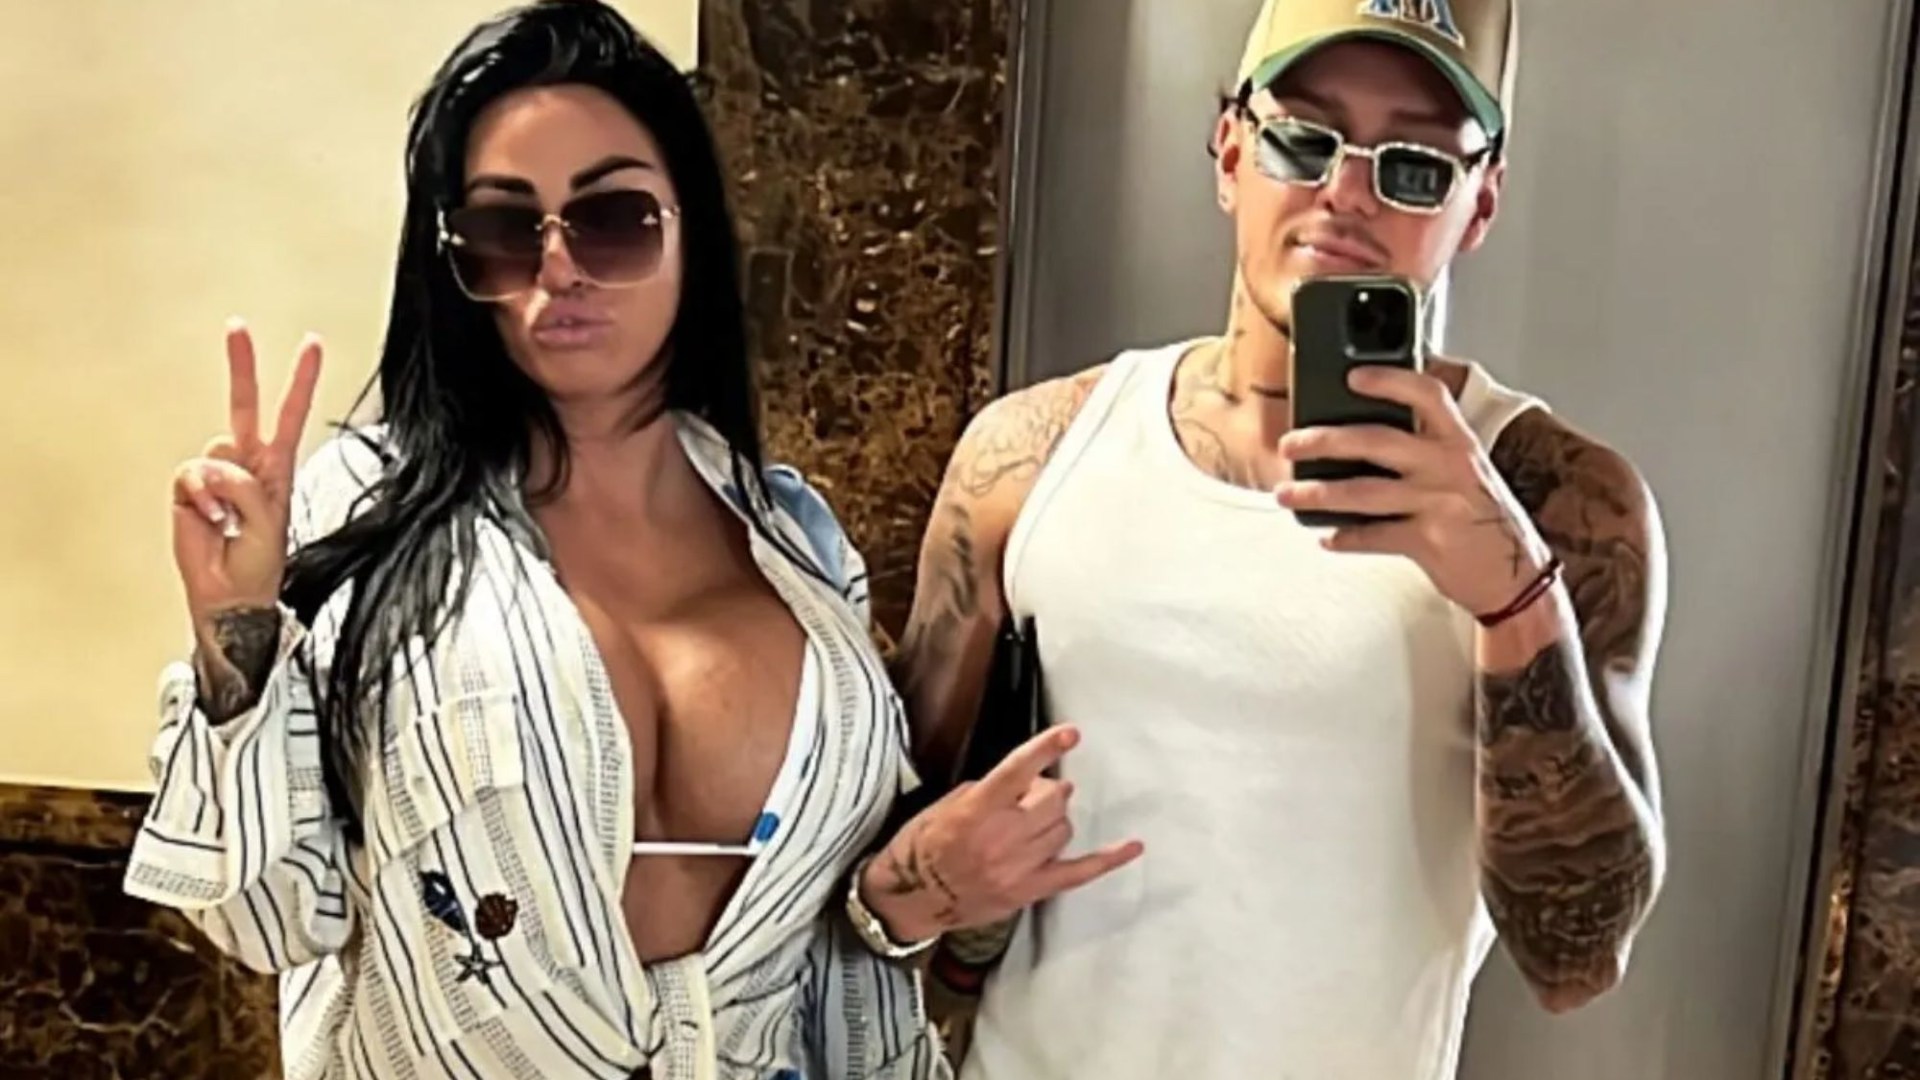 Katie Price sends defiant message as she hits the gym with boyfriend JJ Slater in Cyprus after skipping court [Video]